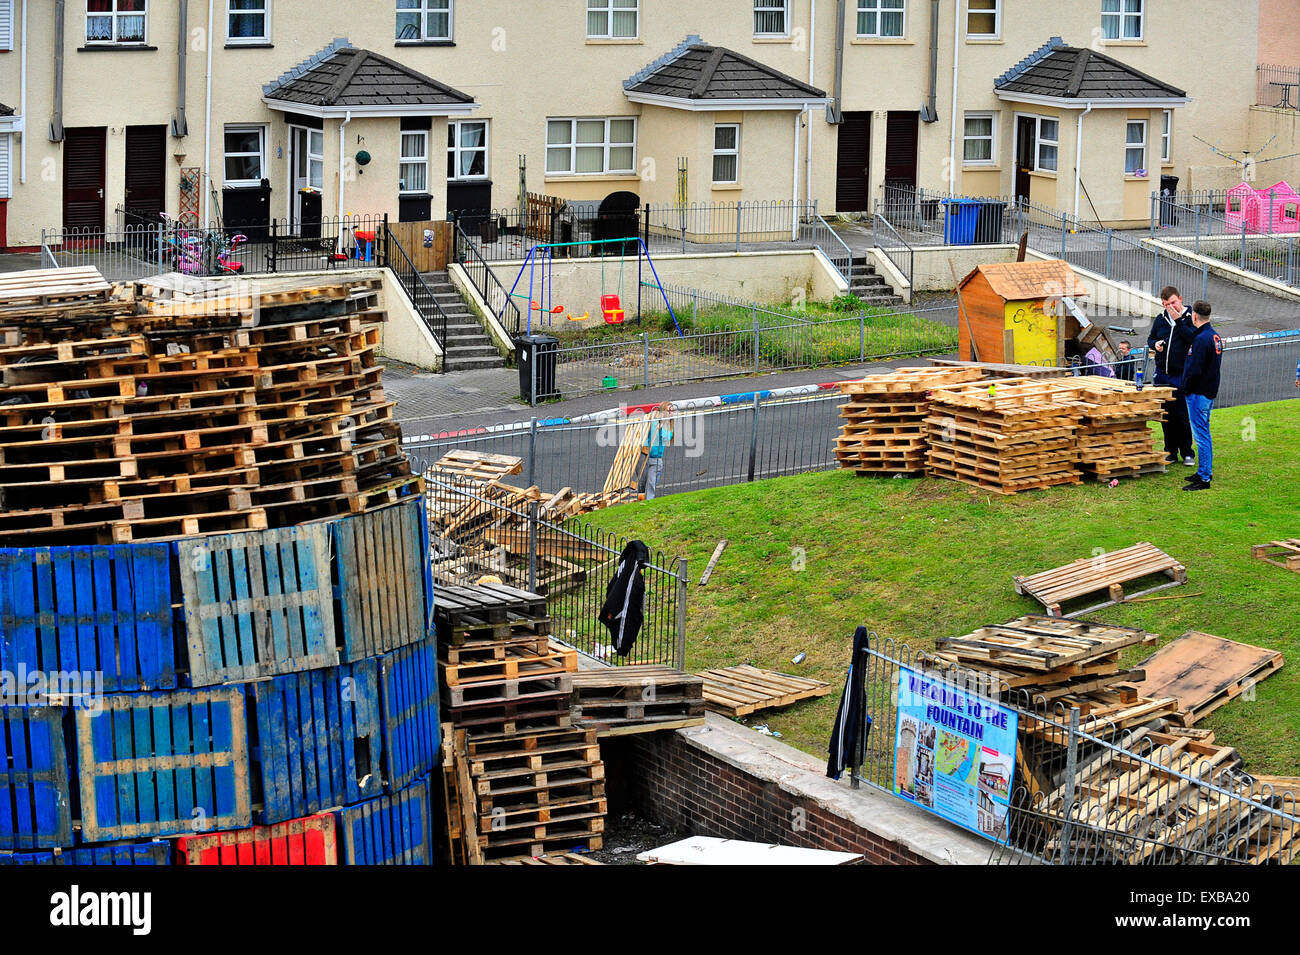 Londonderry, Northern Ireland, UK. 10th July, 2015. Bonfires constructed ahead of Annual Orange Order Parades, Londonderry, Northern Ireland – 10 July 2015. Loyalists in the Fountain Estate construct an 11th night bonfire, with pallets and tyres, to be set  alight  ahead of the annual “Twelfth” of July Orange Order Parades. The 12th July commemorates the in 1690 when Protestant King William III defeated the exiled Catholic King James II. © George Sweeney/Alamy Live News Credit:  George Sweeney/Alamy Live News Stock Photo